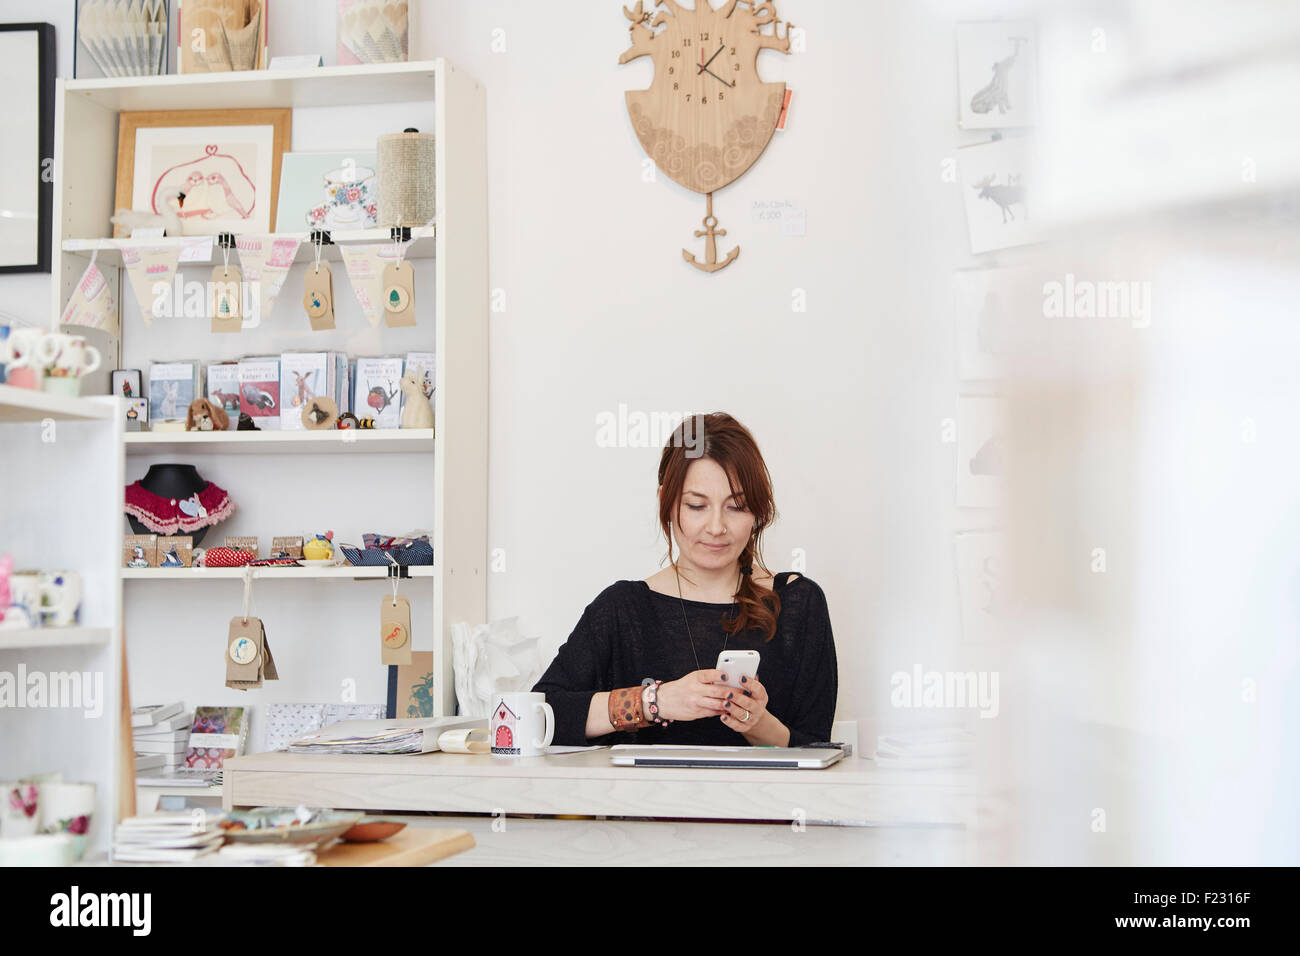 A mature woman sitting using a smart phone in a gift shop, running a small retail business. Stock Photo